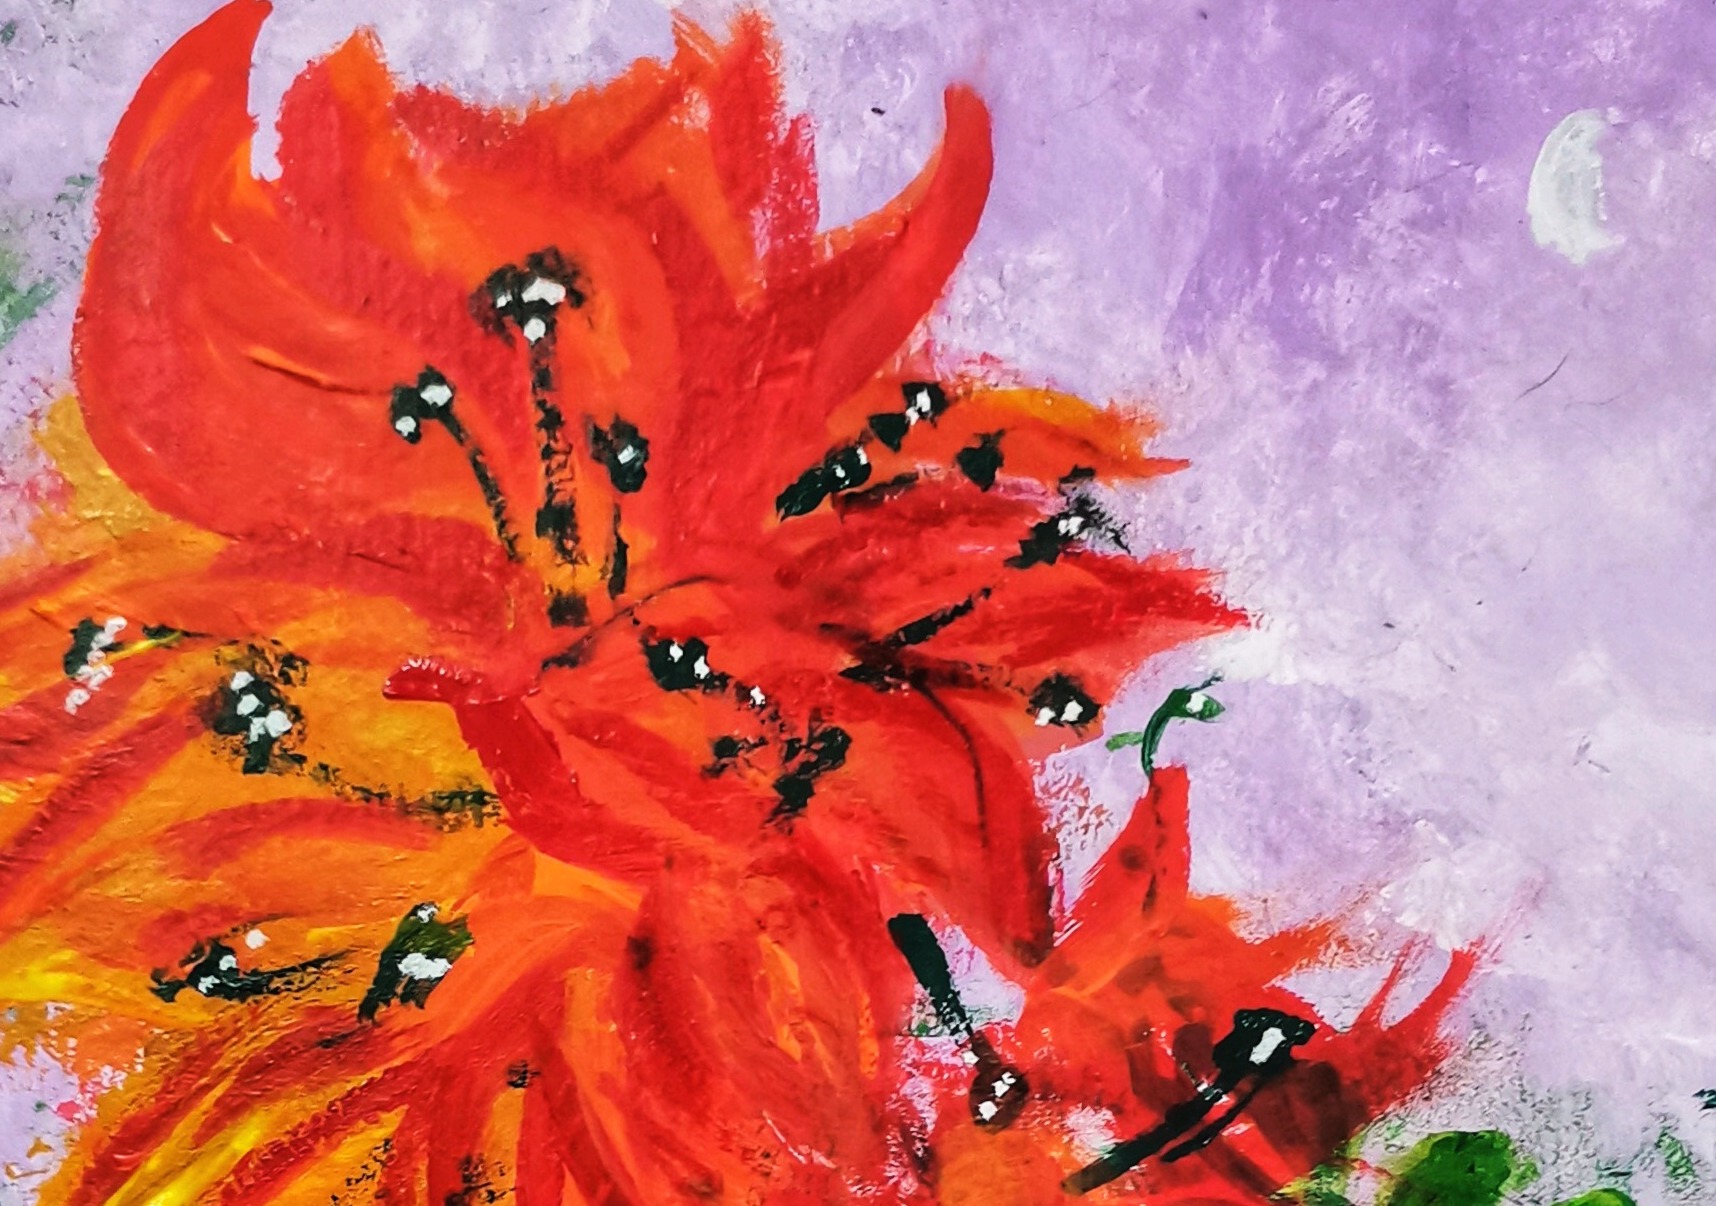 Acrylic painting of red flowers against a purple sky.